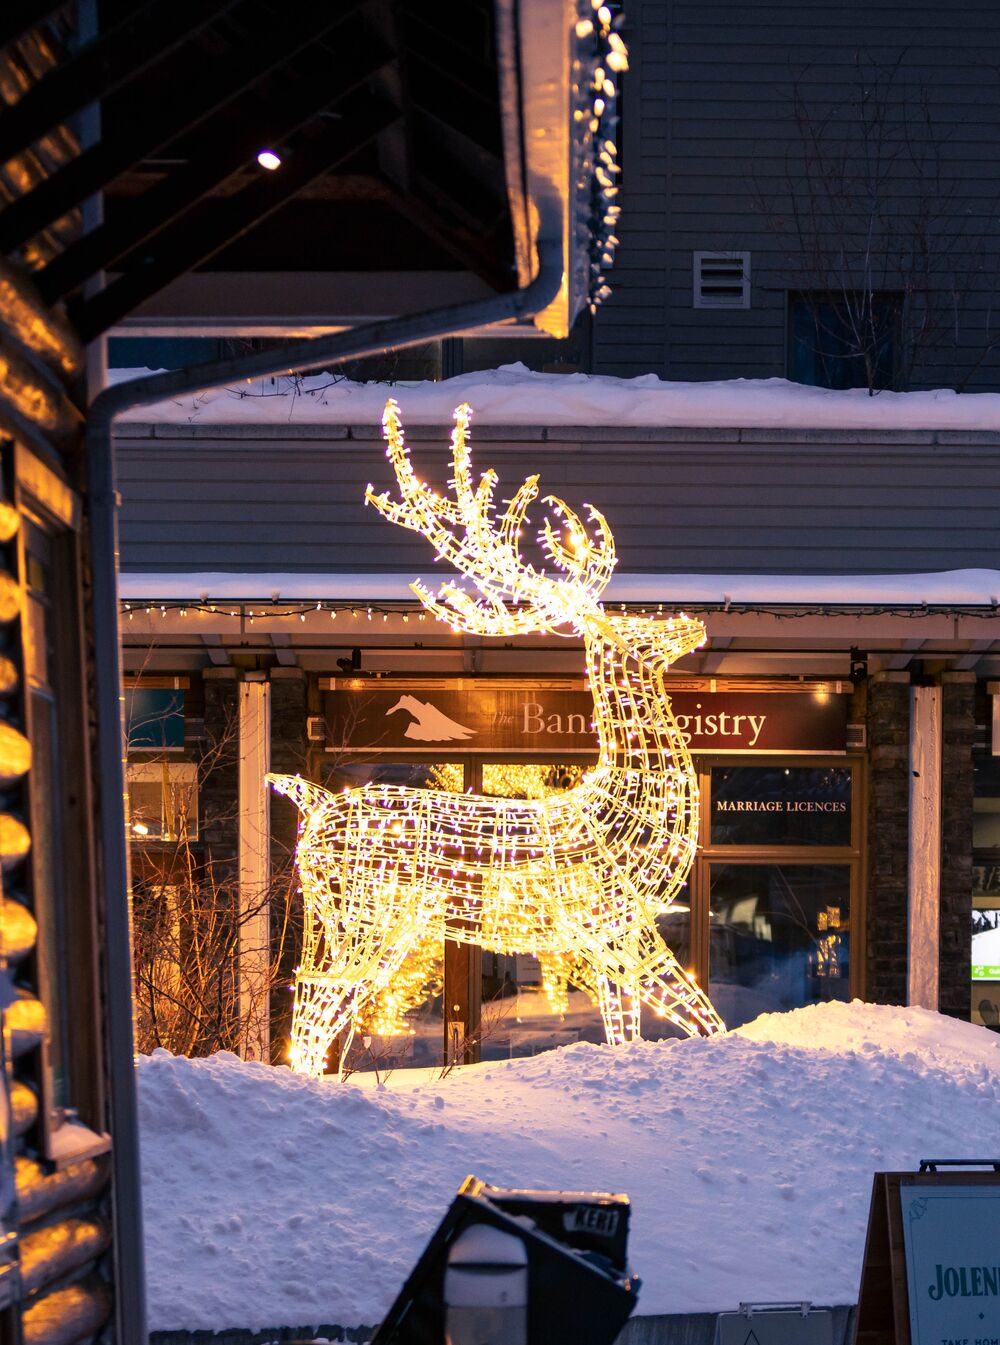 A light up elk sits in a snowbank around shops in Banff.